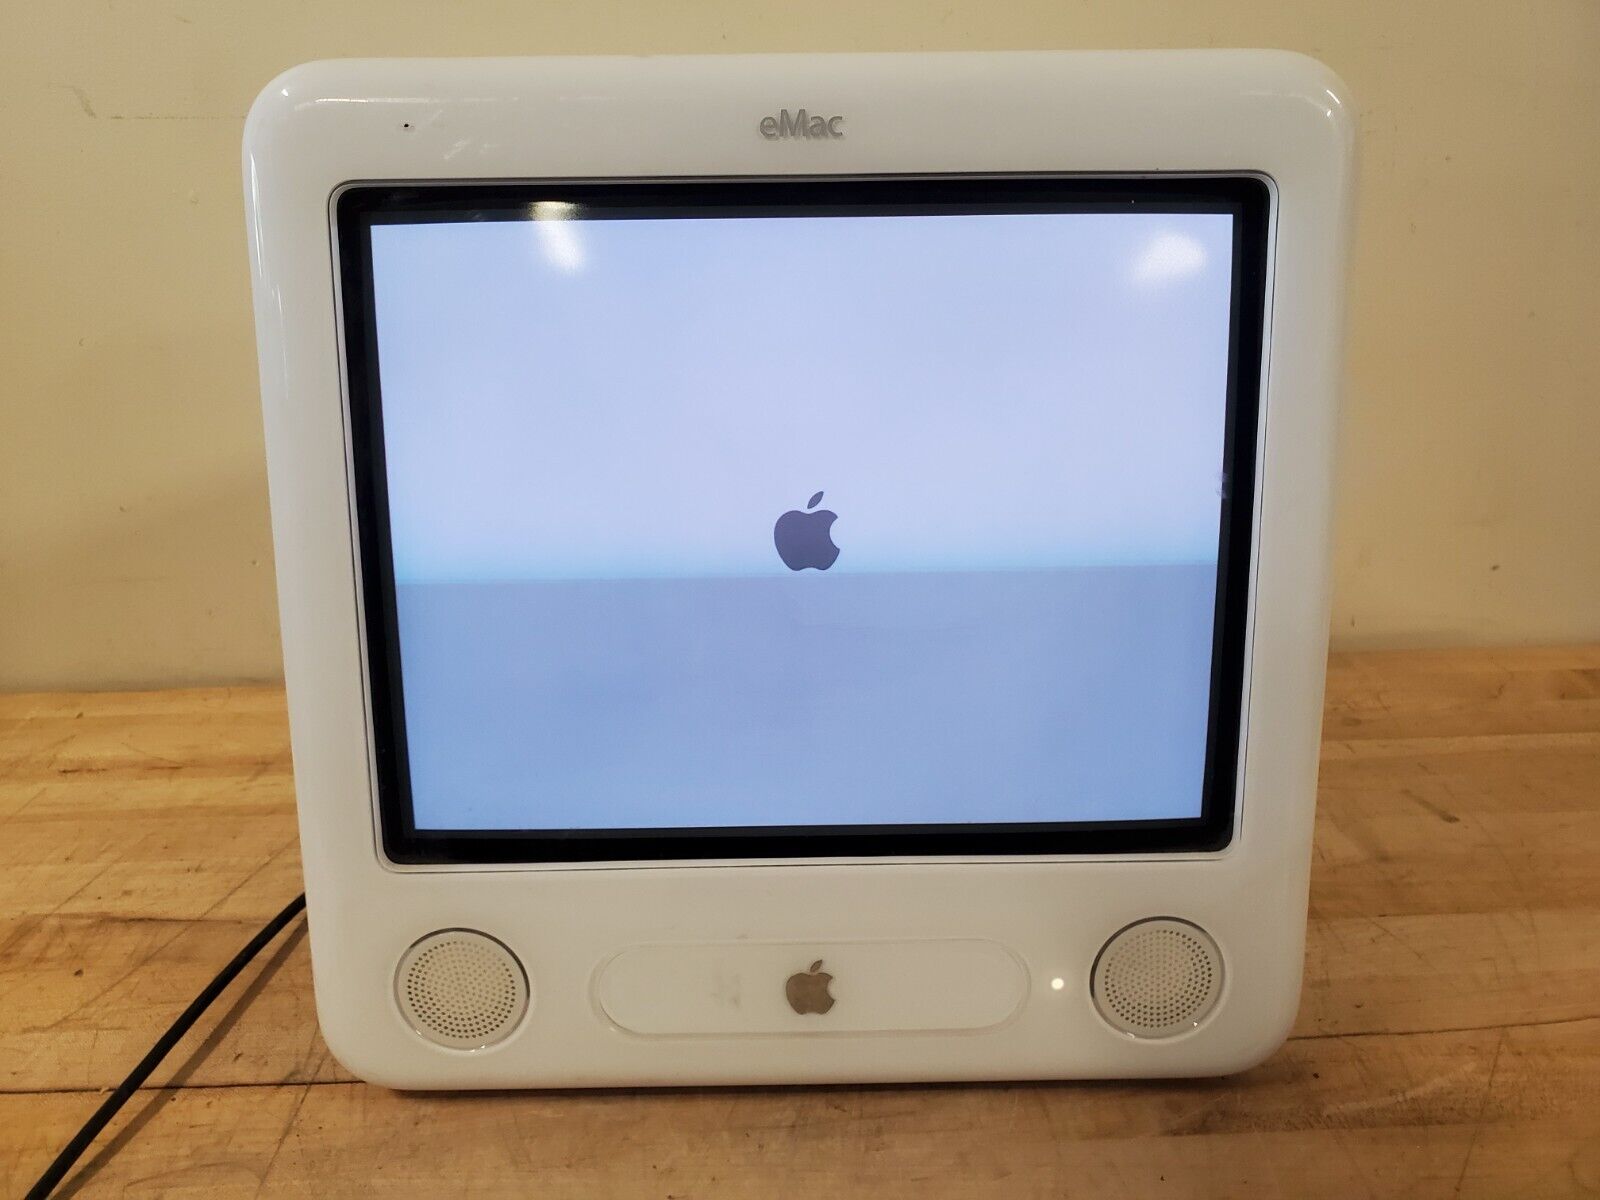 Apple eMac A1002 G4 - Turns On, Read